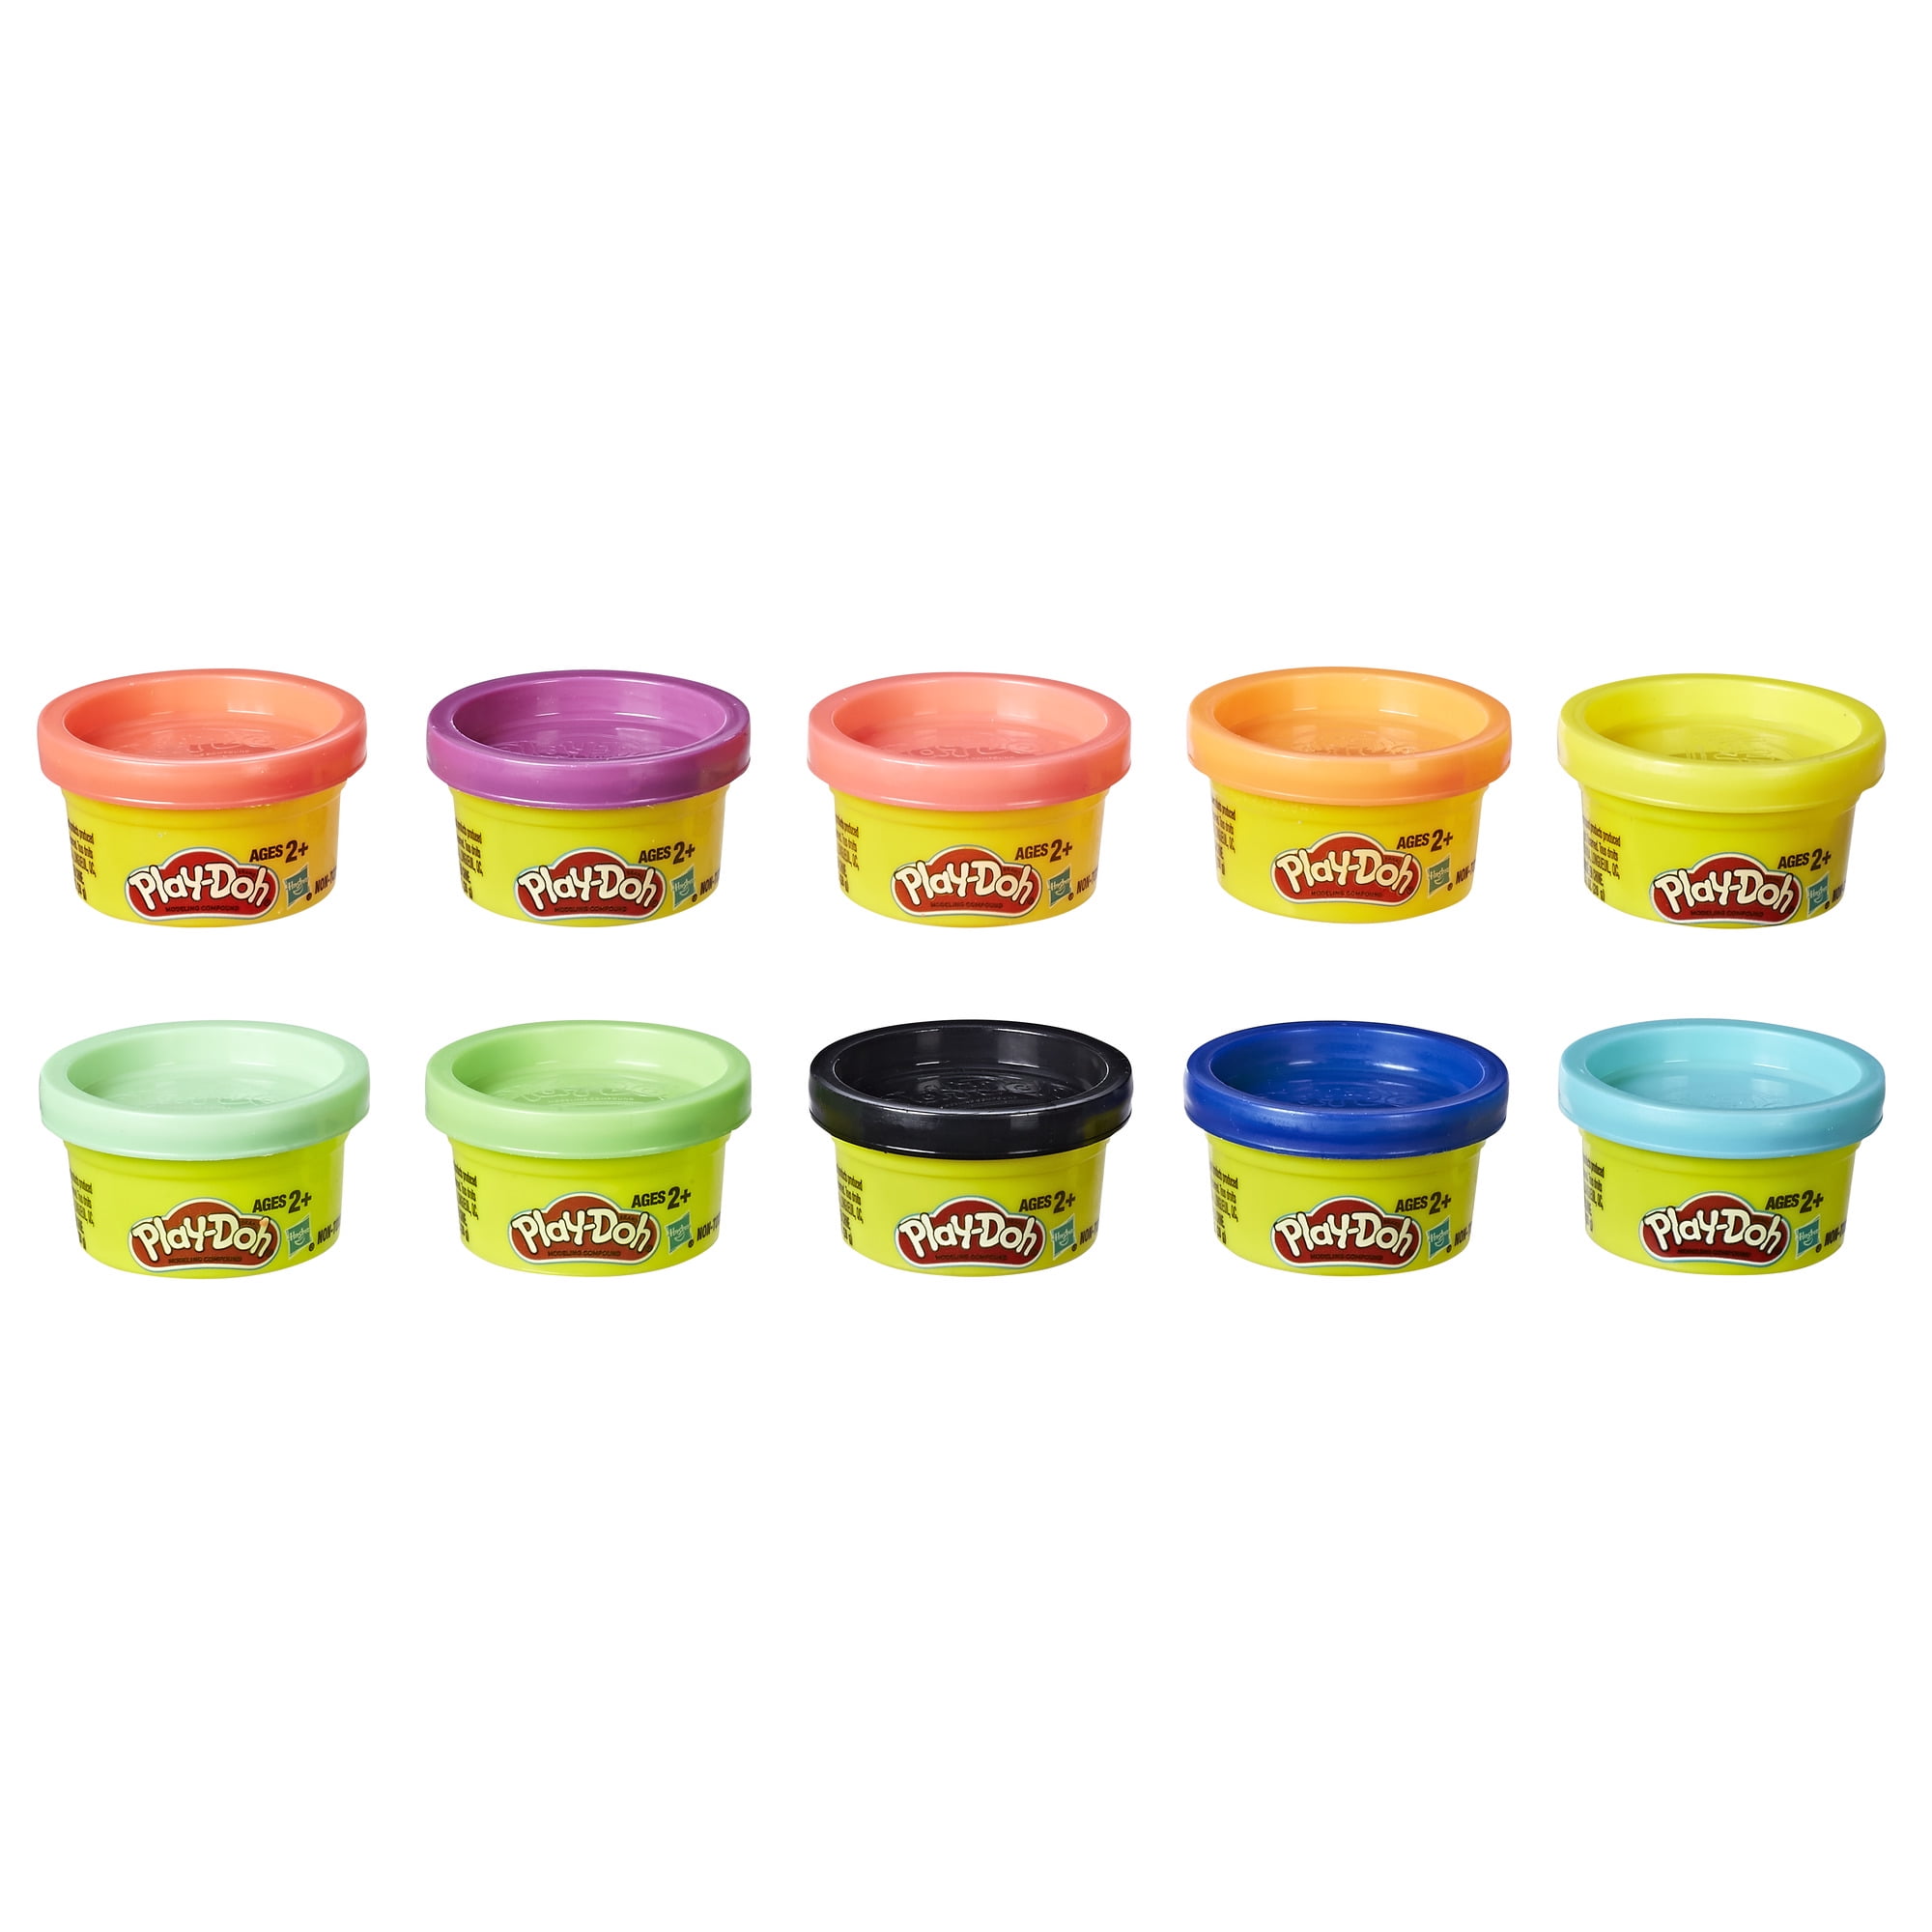 Play-Doh Zoom Zoom Vacuum and Cleanup Play Dough Set for Boys and